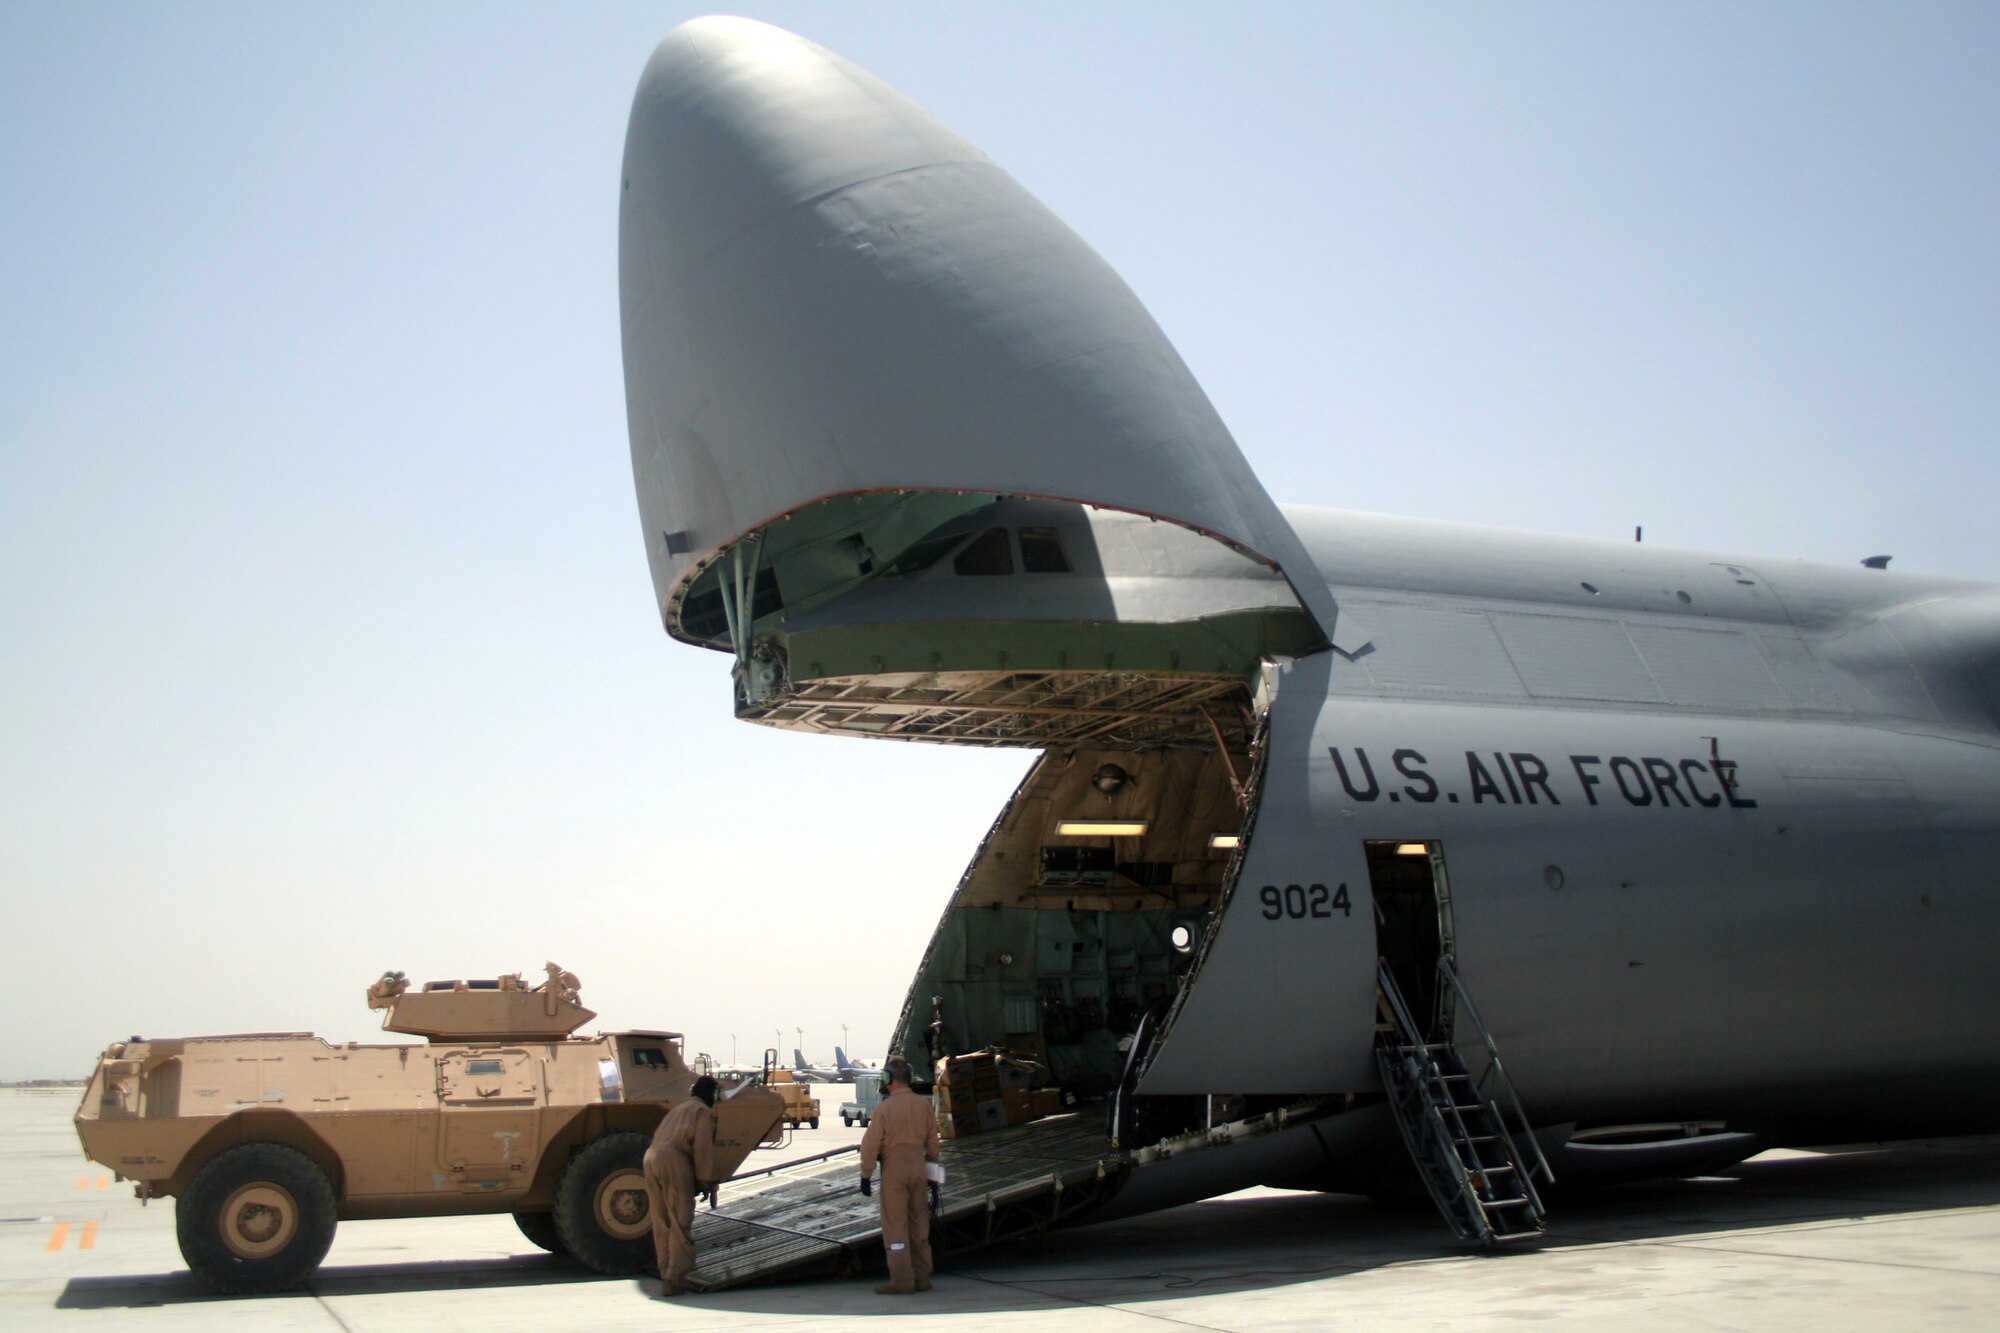 Airmen load a C-5M Super Galaxy from Dover Air Force Base, Del., with cargo at Bagram Airfield, Afghanistan, on June 5, 2011. The C-5M's mission to Bagram  was to complete the first Arctic overflight from Dover AFB to Bagram Airfield. The plane successfully landed at Bagram in just over 15 hours on June 6, 2011. (U.S. Air Force Photo/Master Sgt. Scott T. Sturkol)